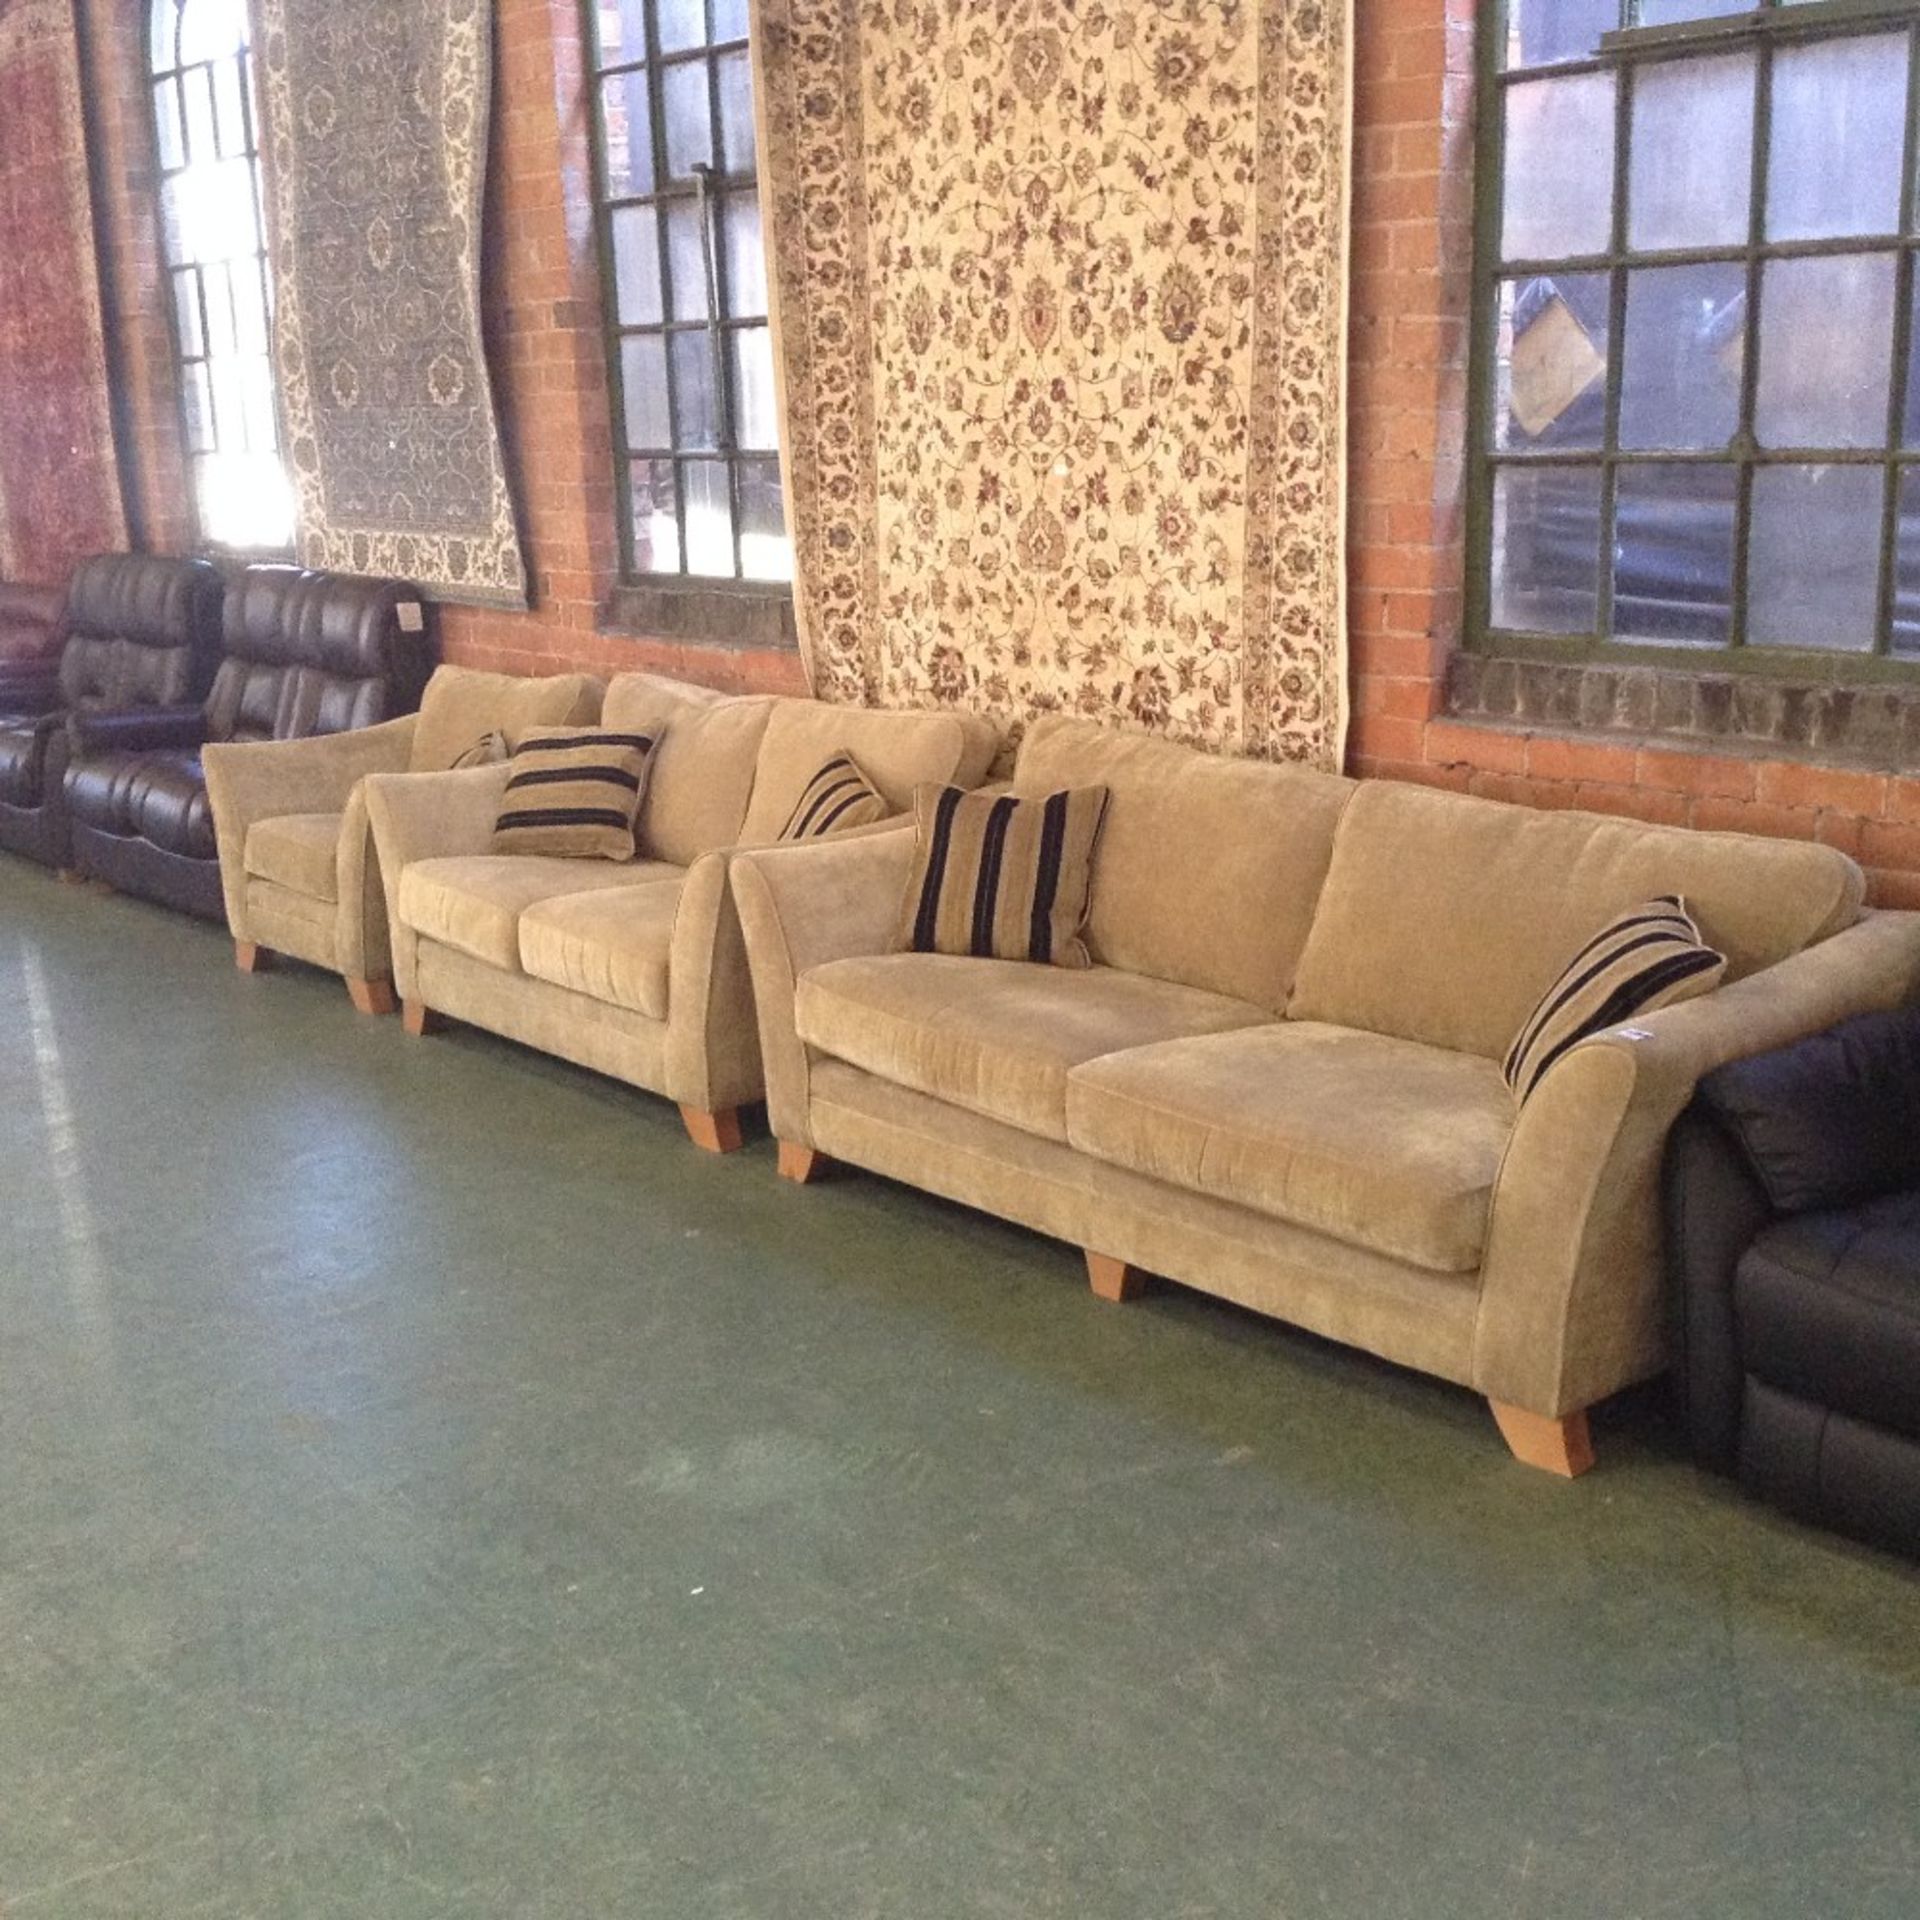 GOLDEN FABRIC 3 SEATER SOFA 2 SEATER SOFA AND CHAI